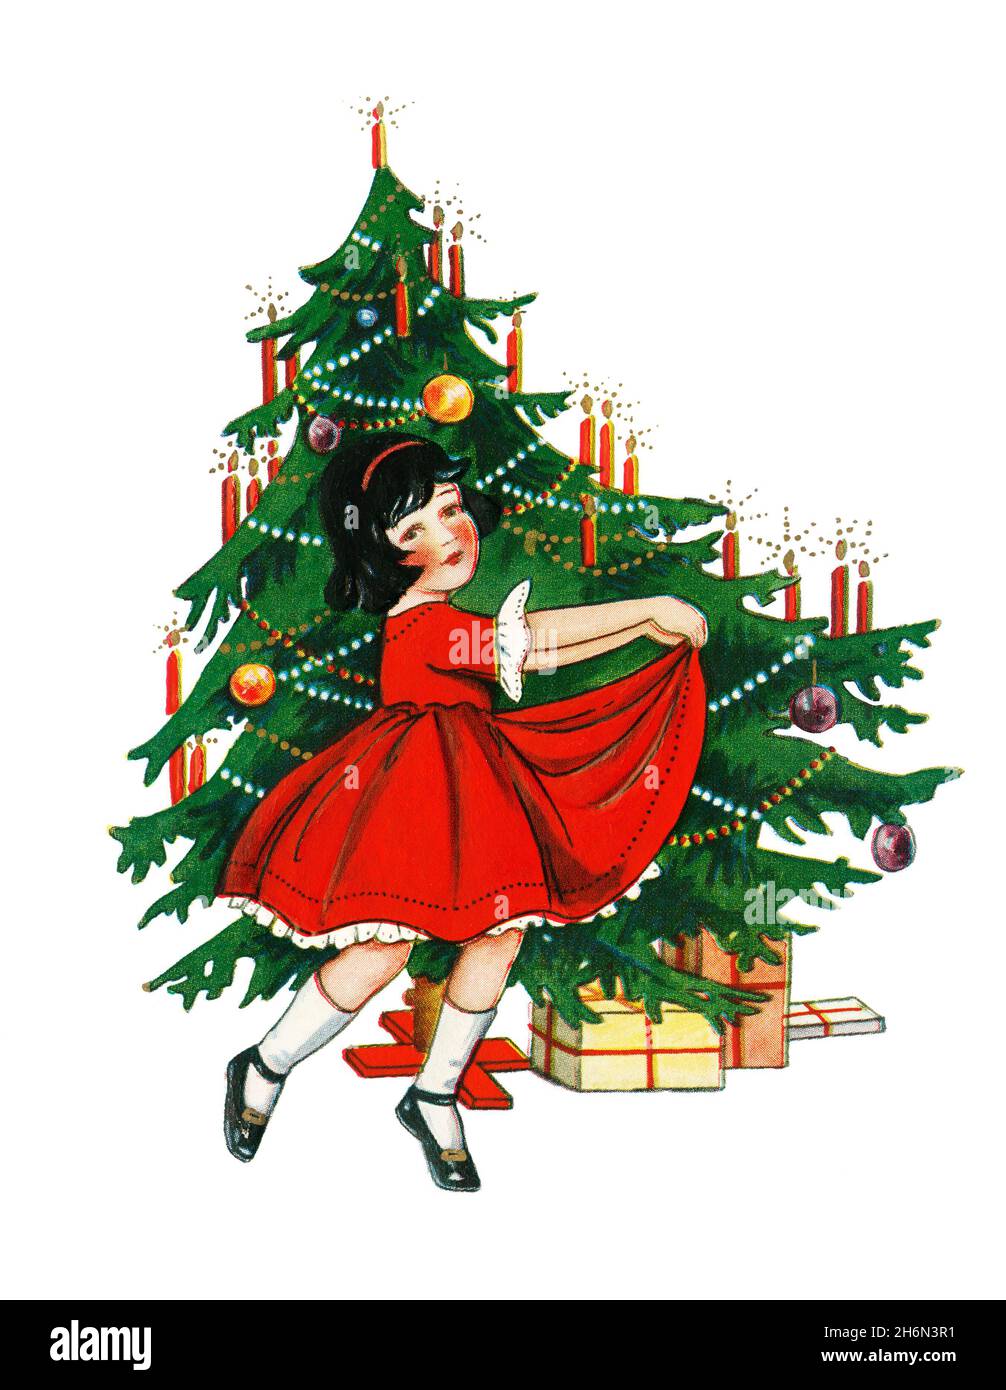 Young girl dancing in front of Christmas tree Stock Photo